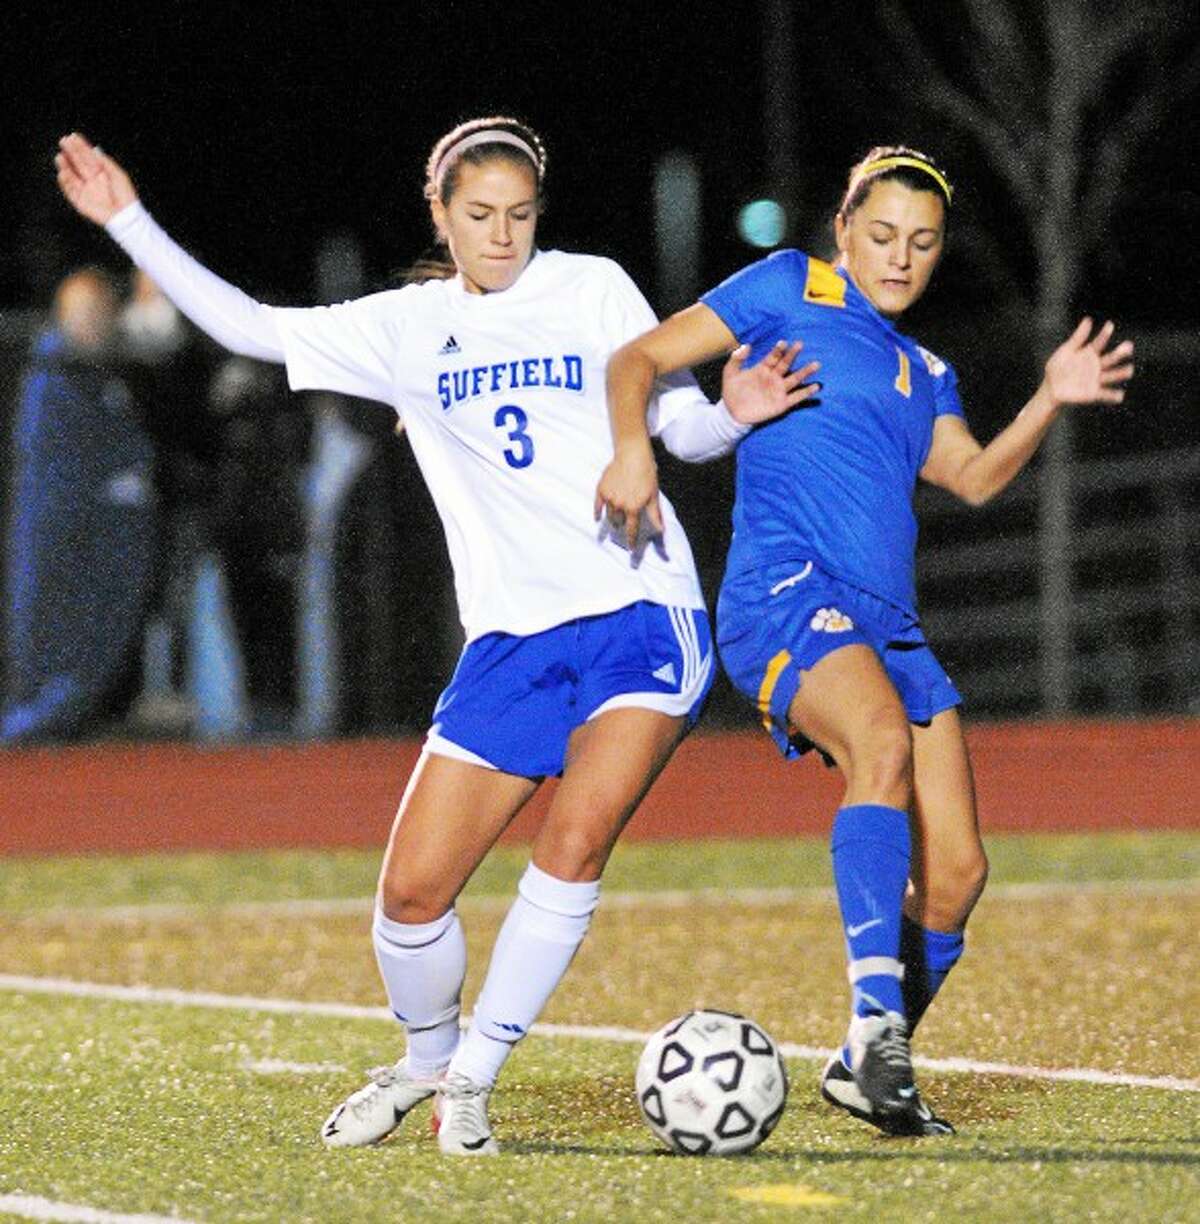 Mercy’s Blakeslee Palmer battles Suffield junior Katie McDonough during the CIAC Class LL semifinal game at Middletown High School Monday afternoon. Mercy lost 3-1. Catherine Avalone – The Middletown Press